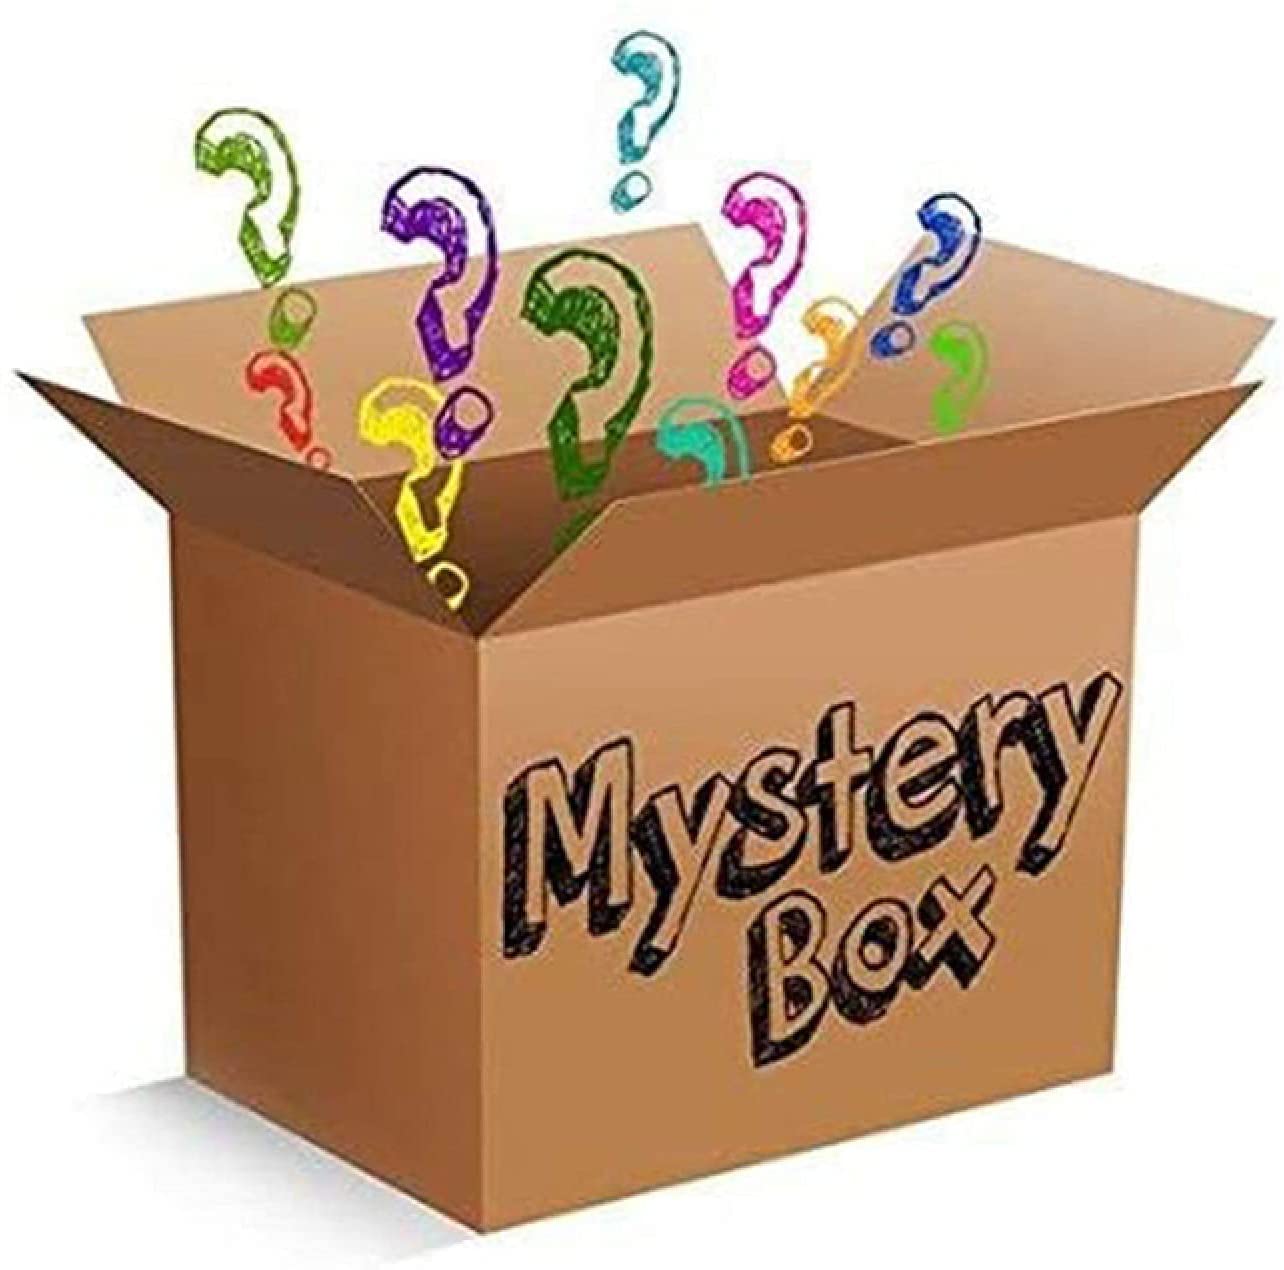 

Lucky Box a Mysterious Gift Party Mystery Boxes Products, Given to Yourself or Son, Father, Boyfriend When The Holidays Night Coming